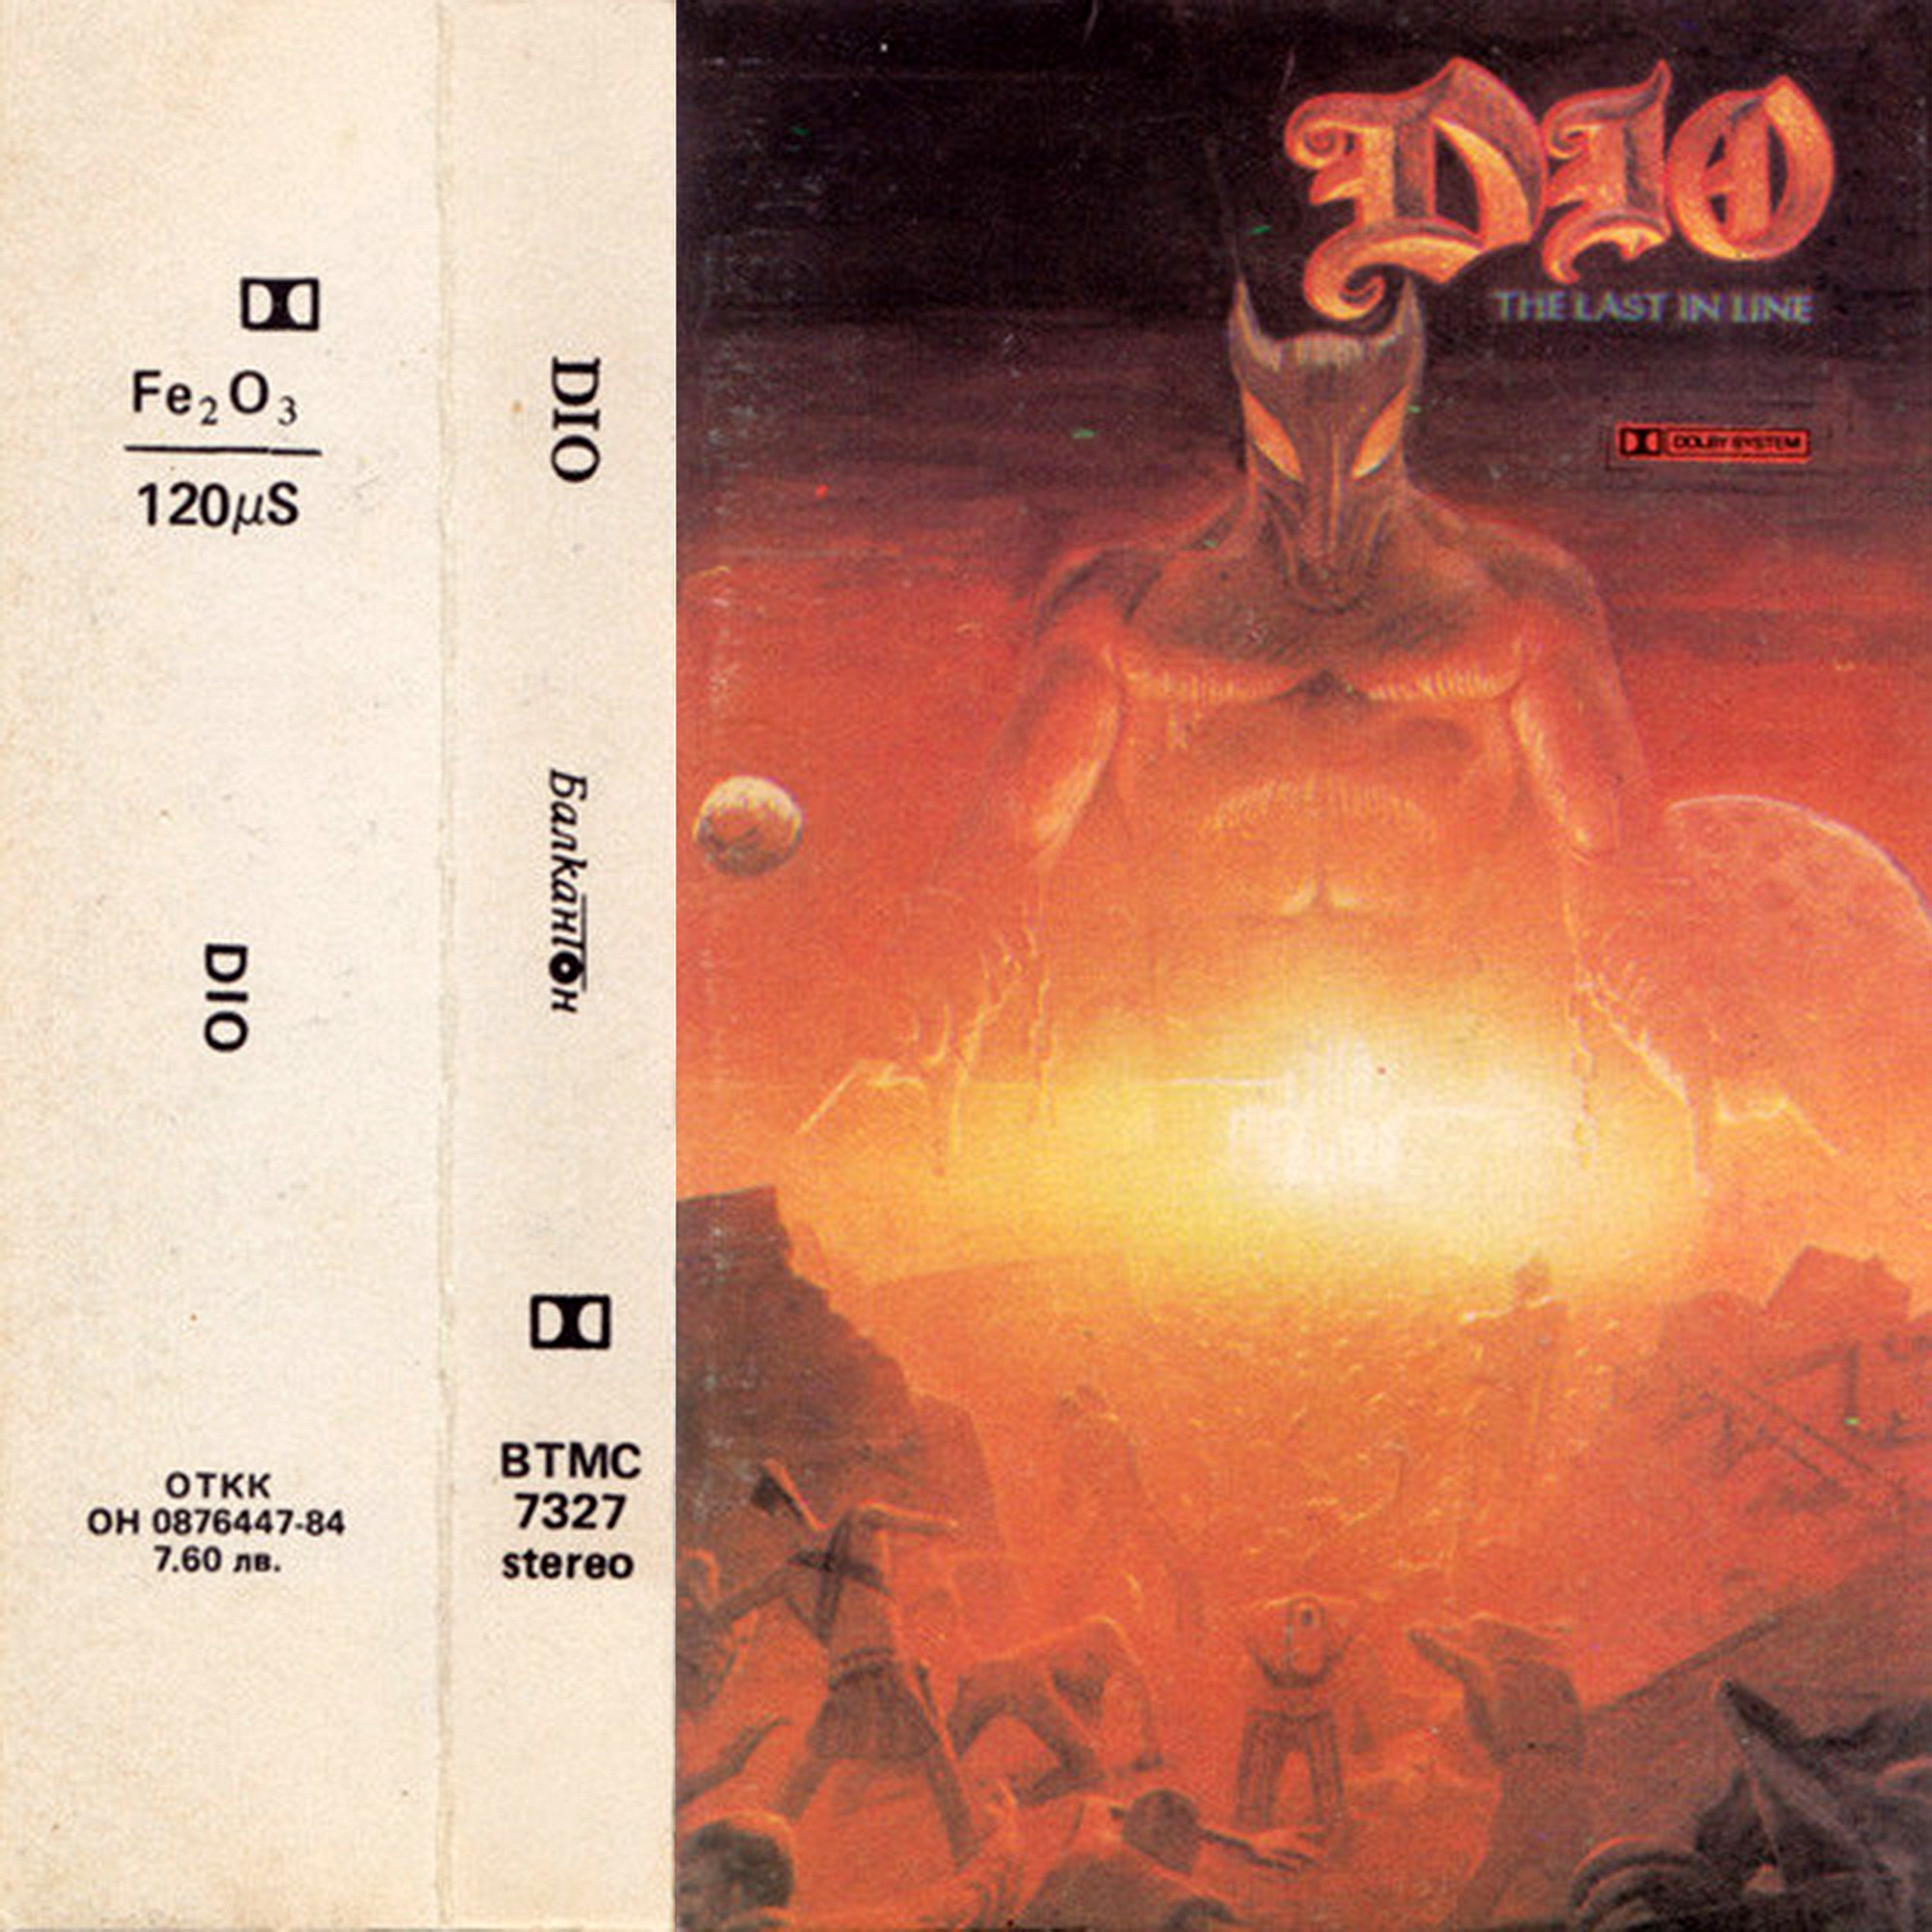 Dio ‎– The Last In Line